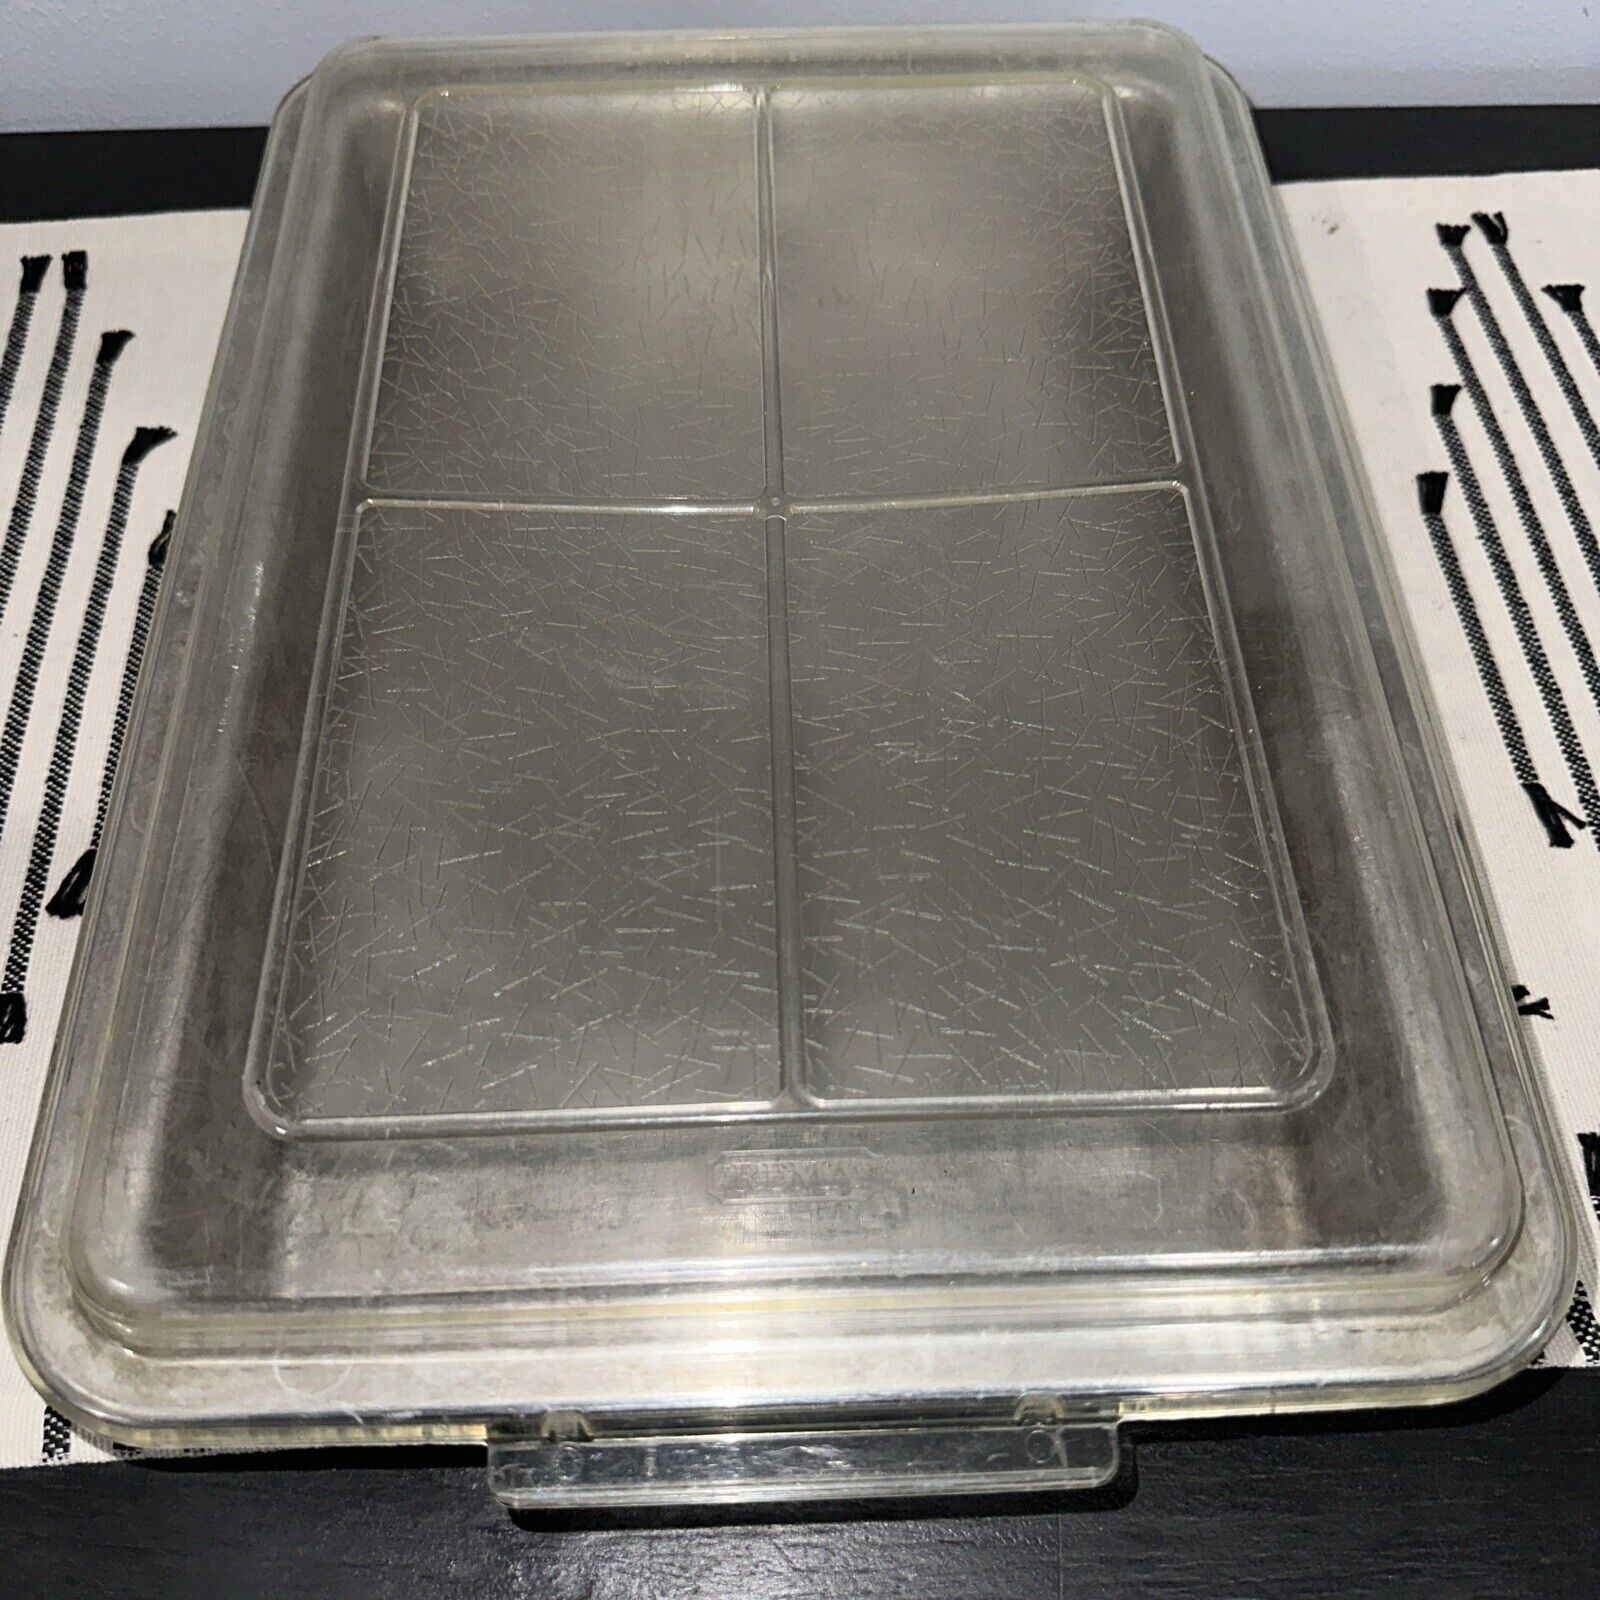 Vintage Rema Air Bake Double Wall Insulated Aluminum 9x13 Baking Pan with Lid